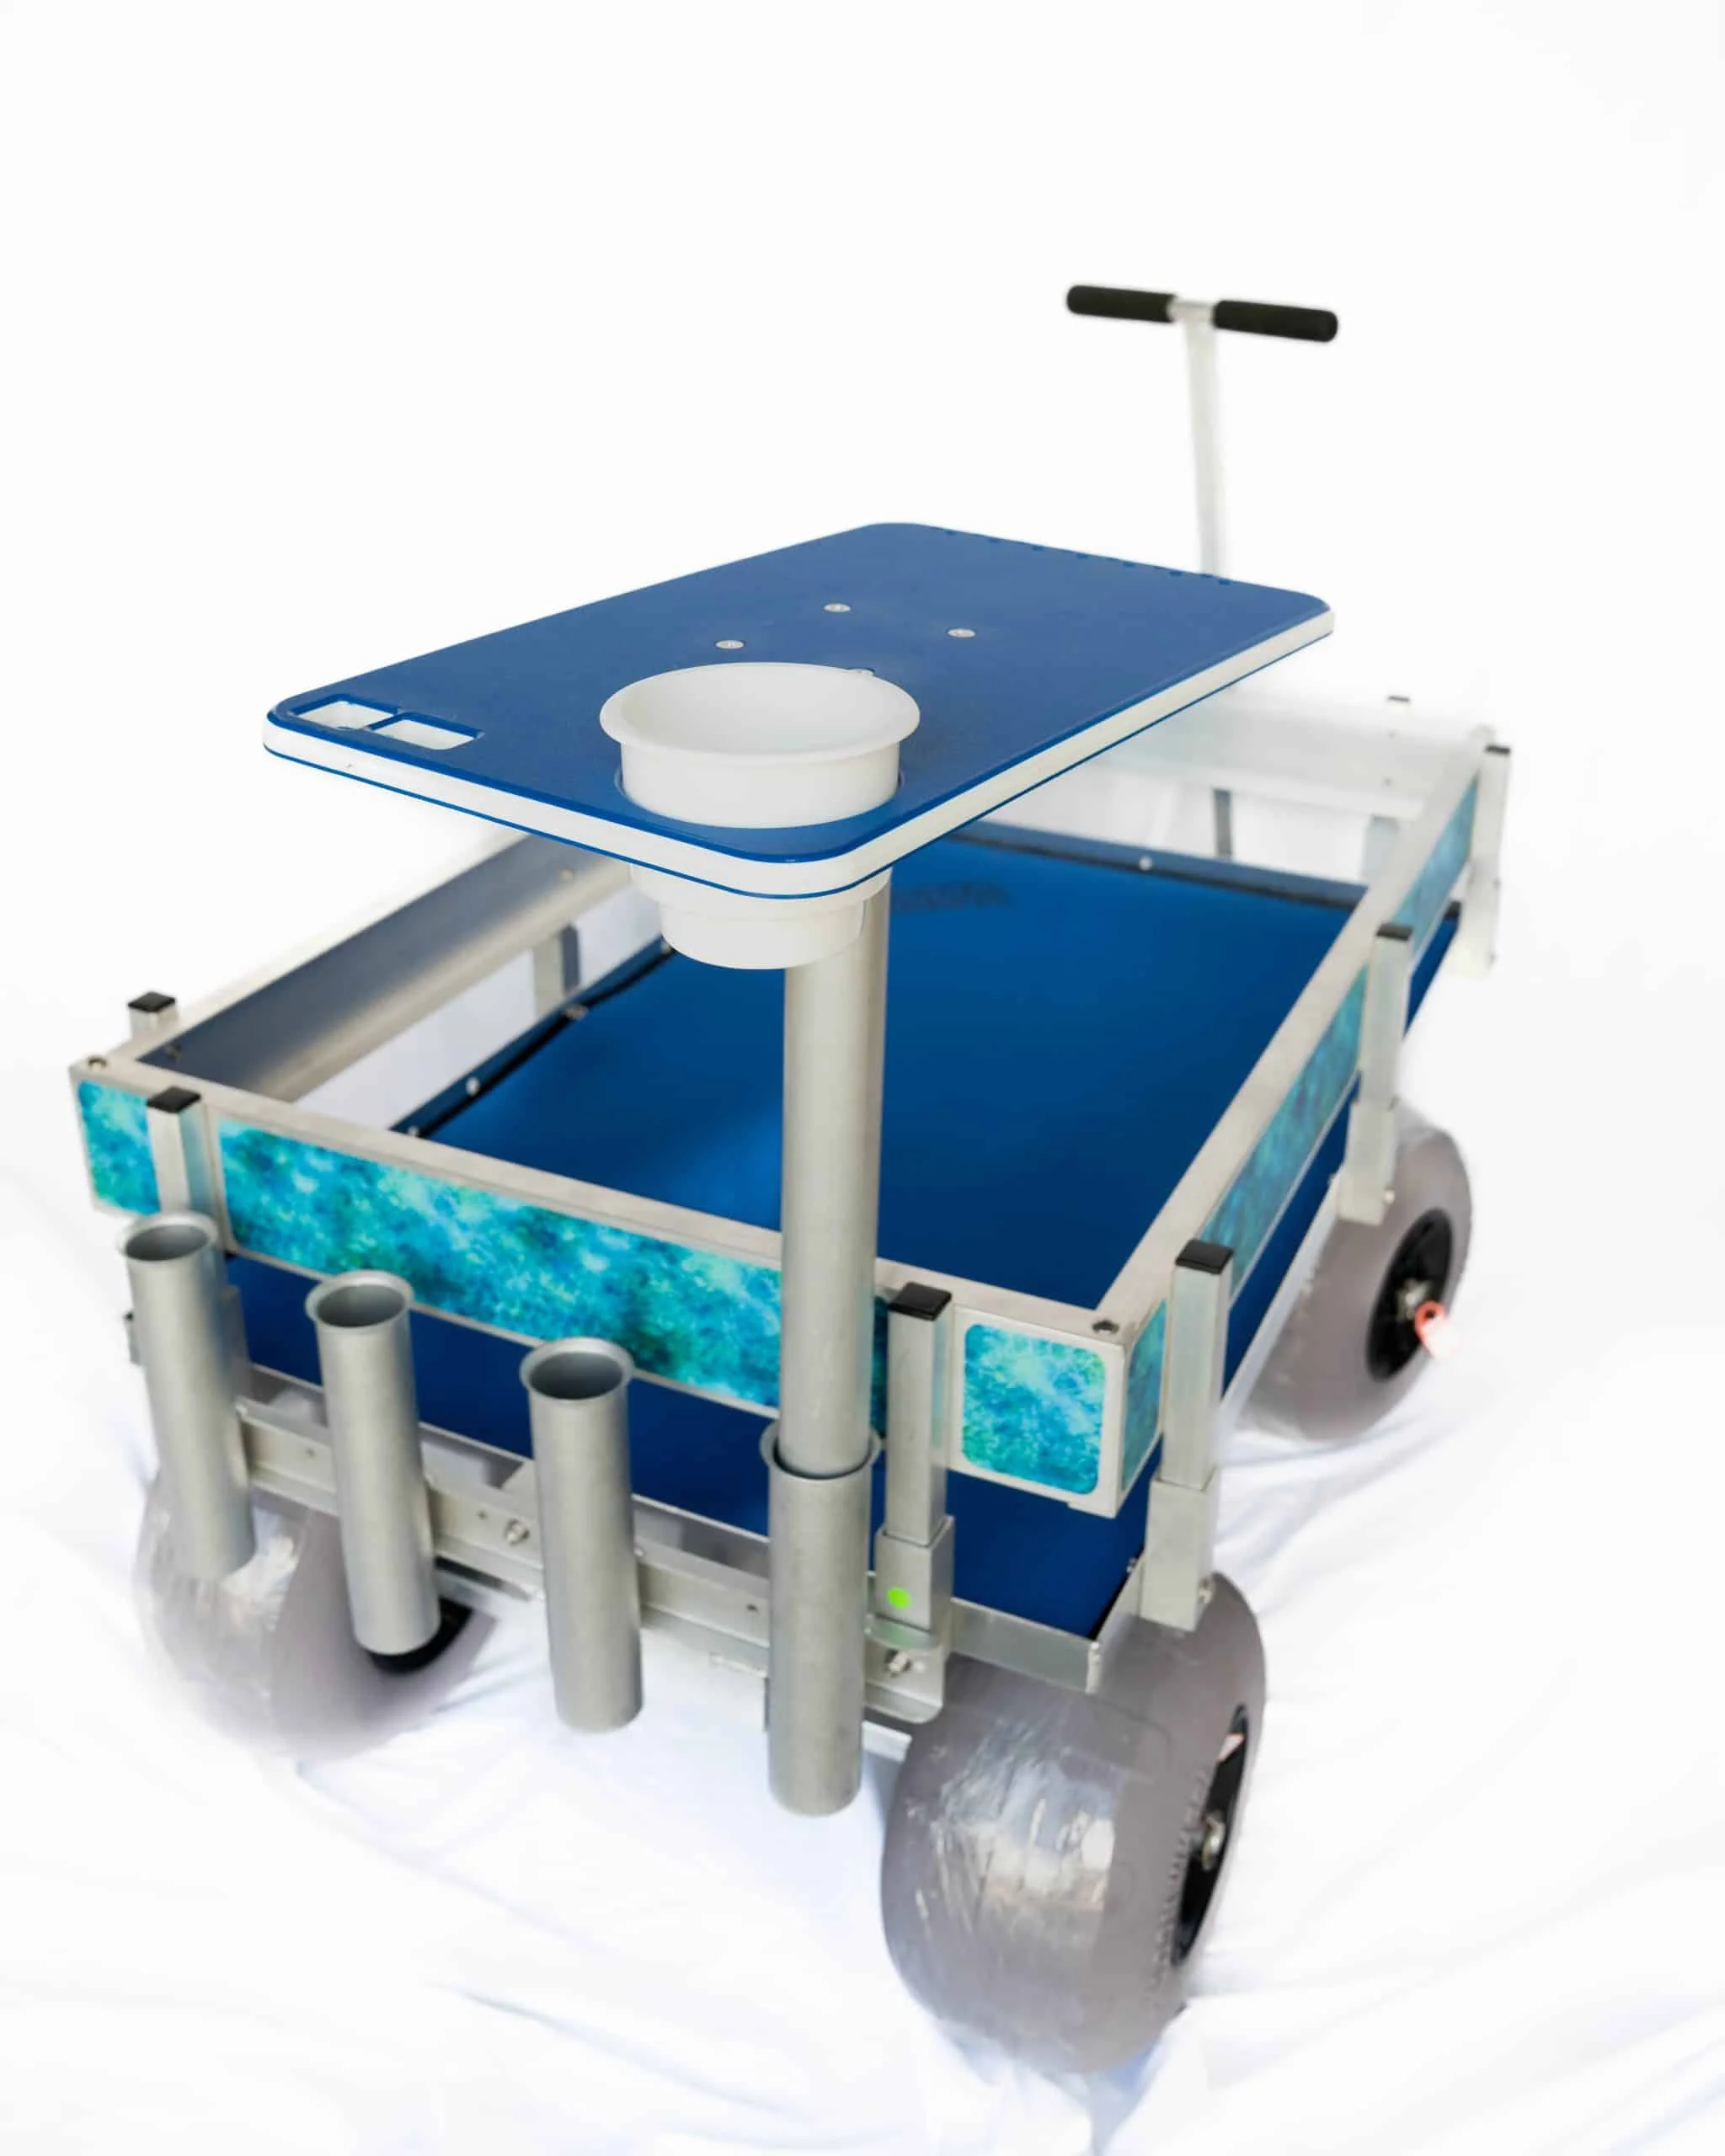 Kahuna Wagon with a Starboard cutting board attachment in royal blue